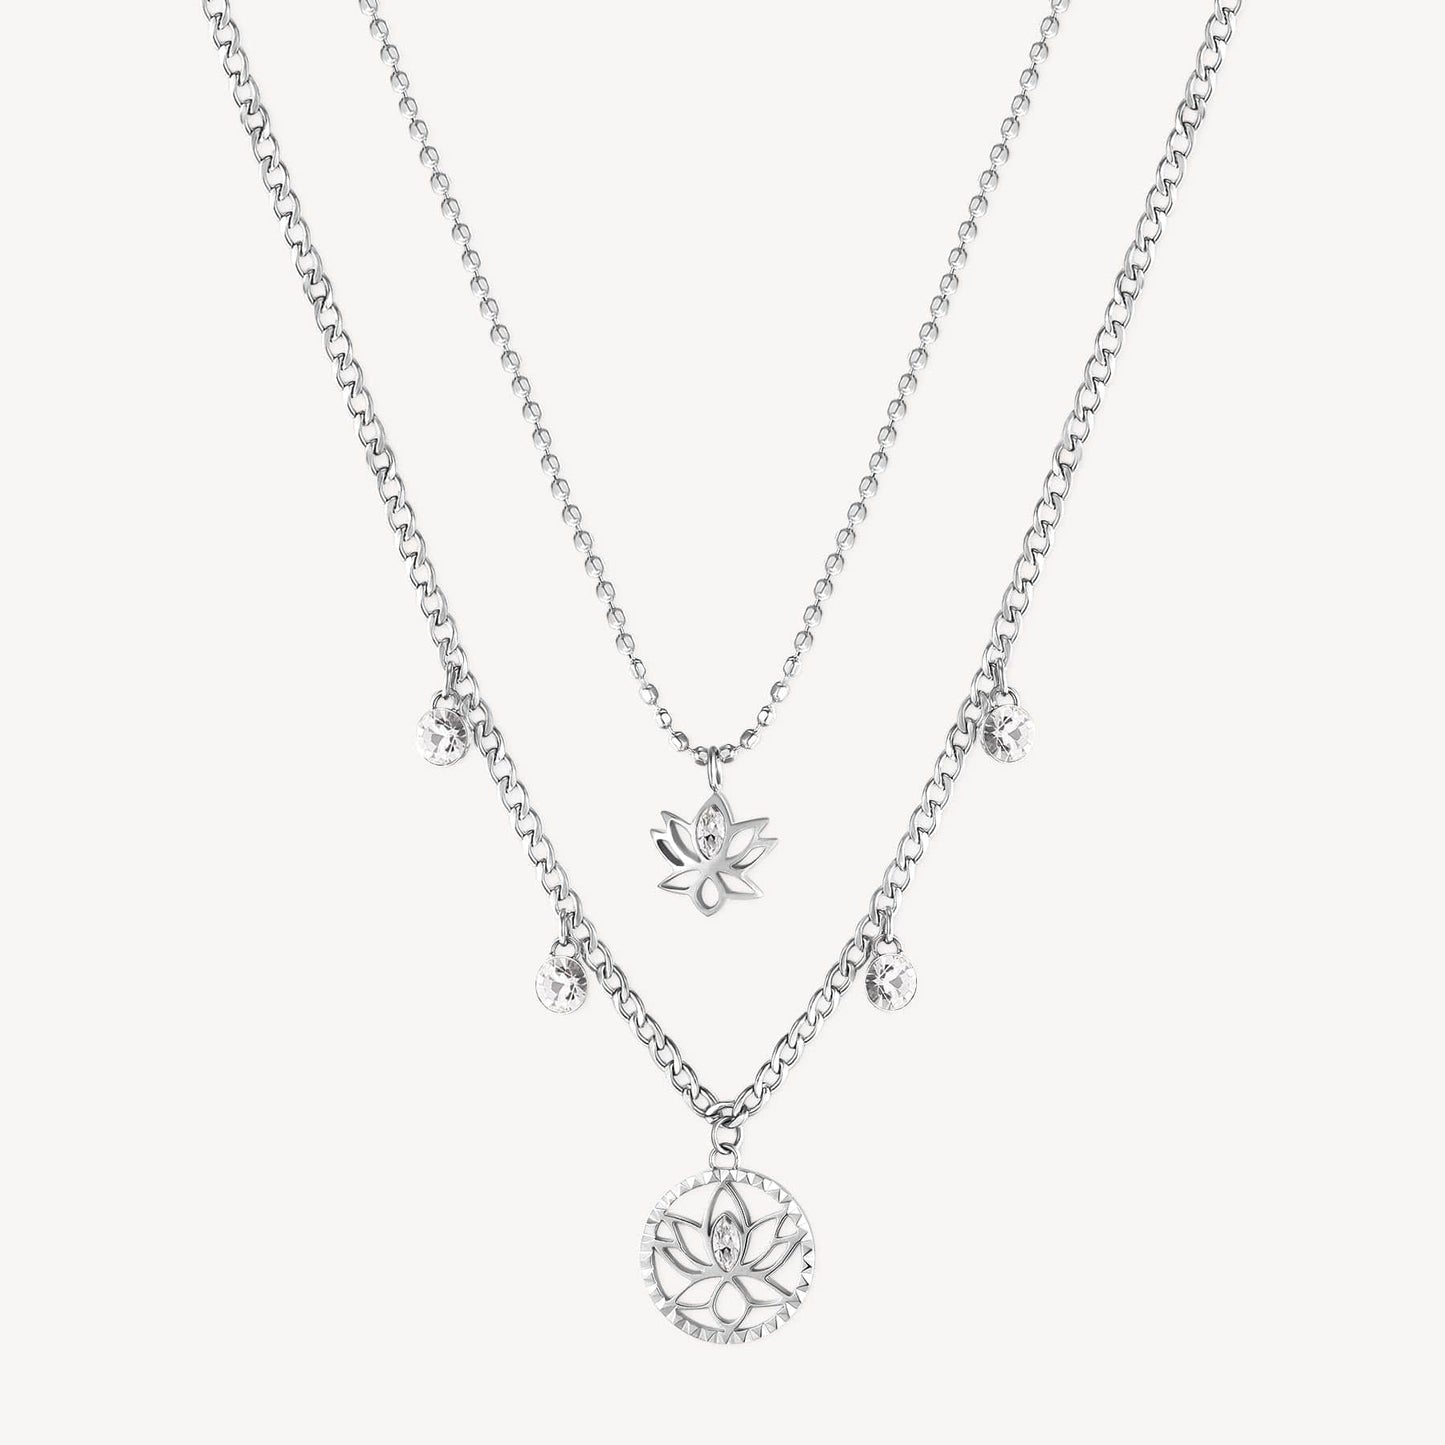 NKL-SS Stainless Steel Chakra Necklace - Lotus Flower